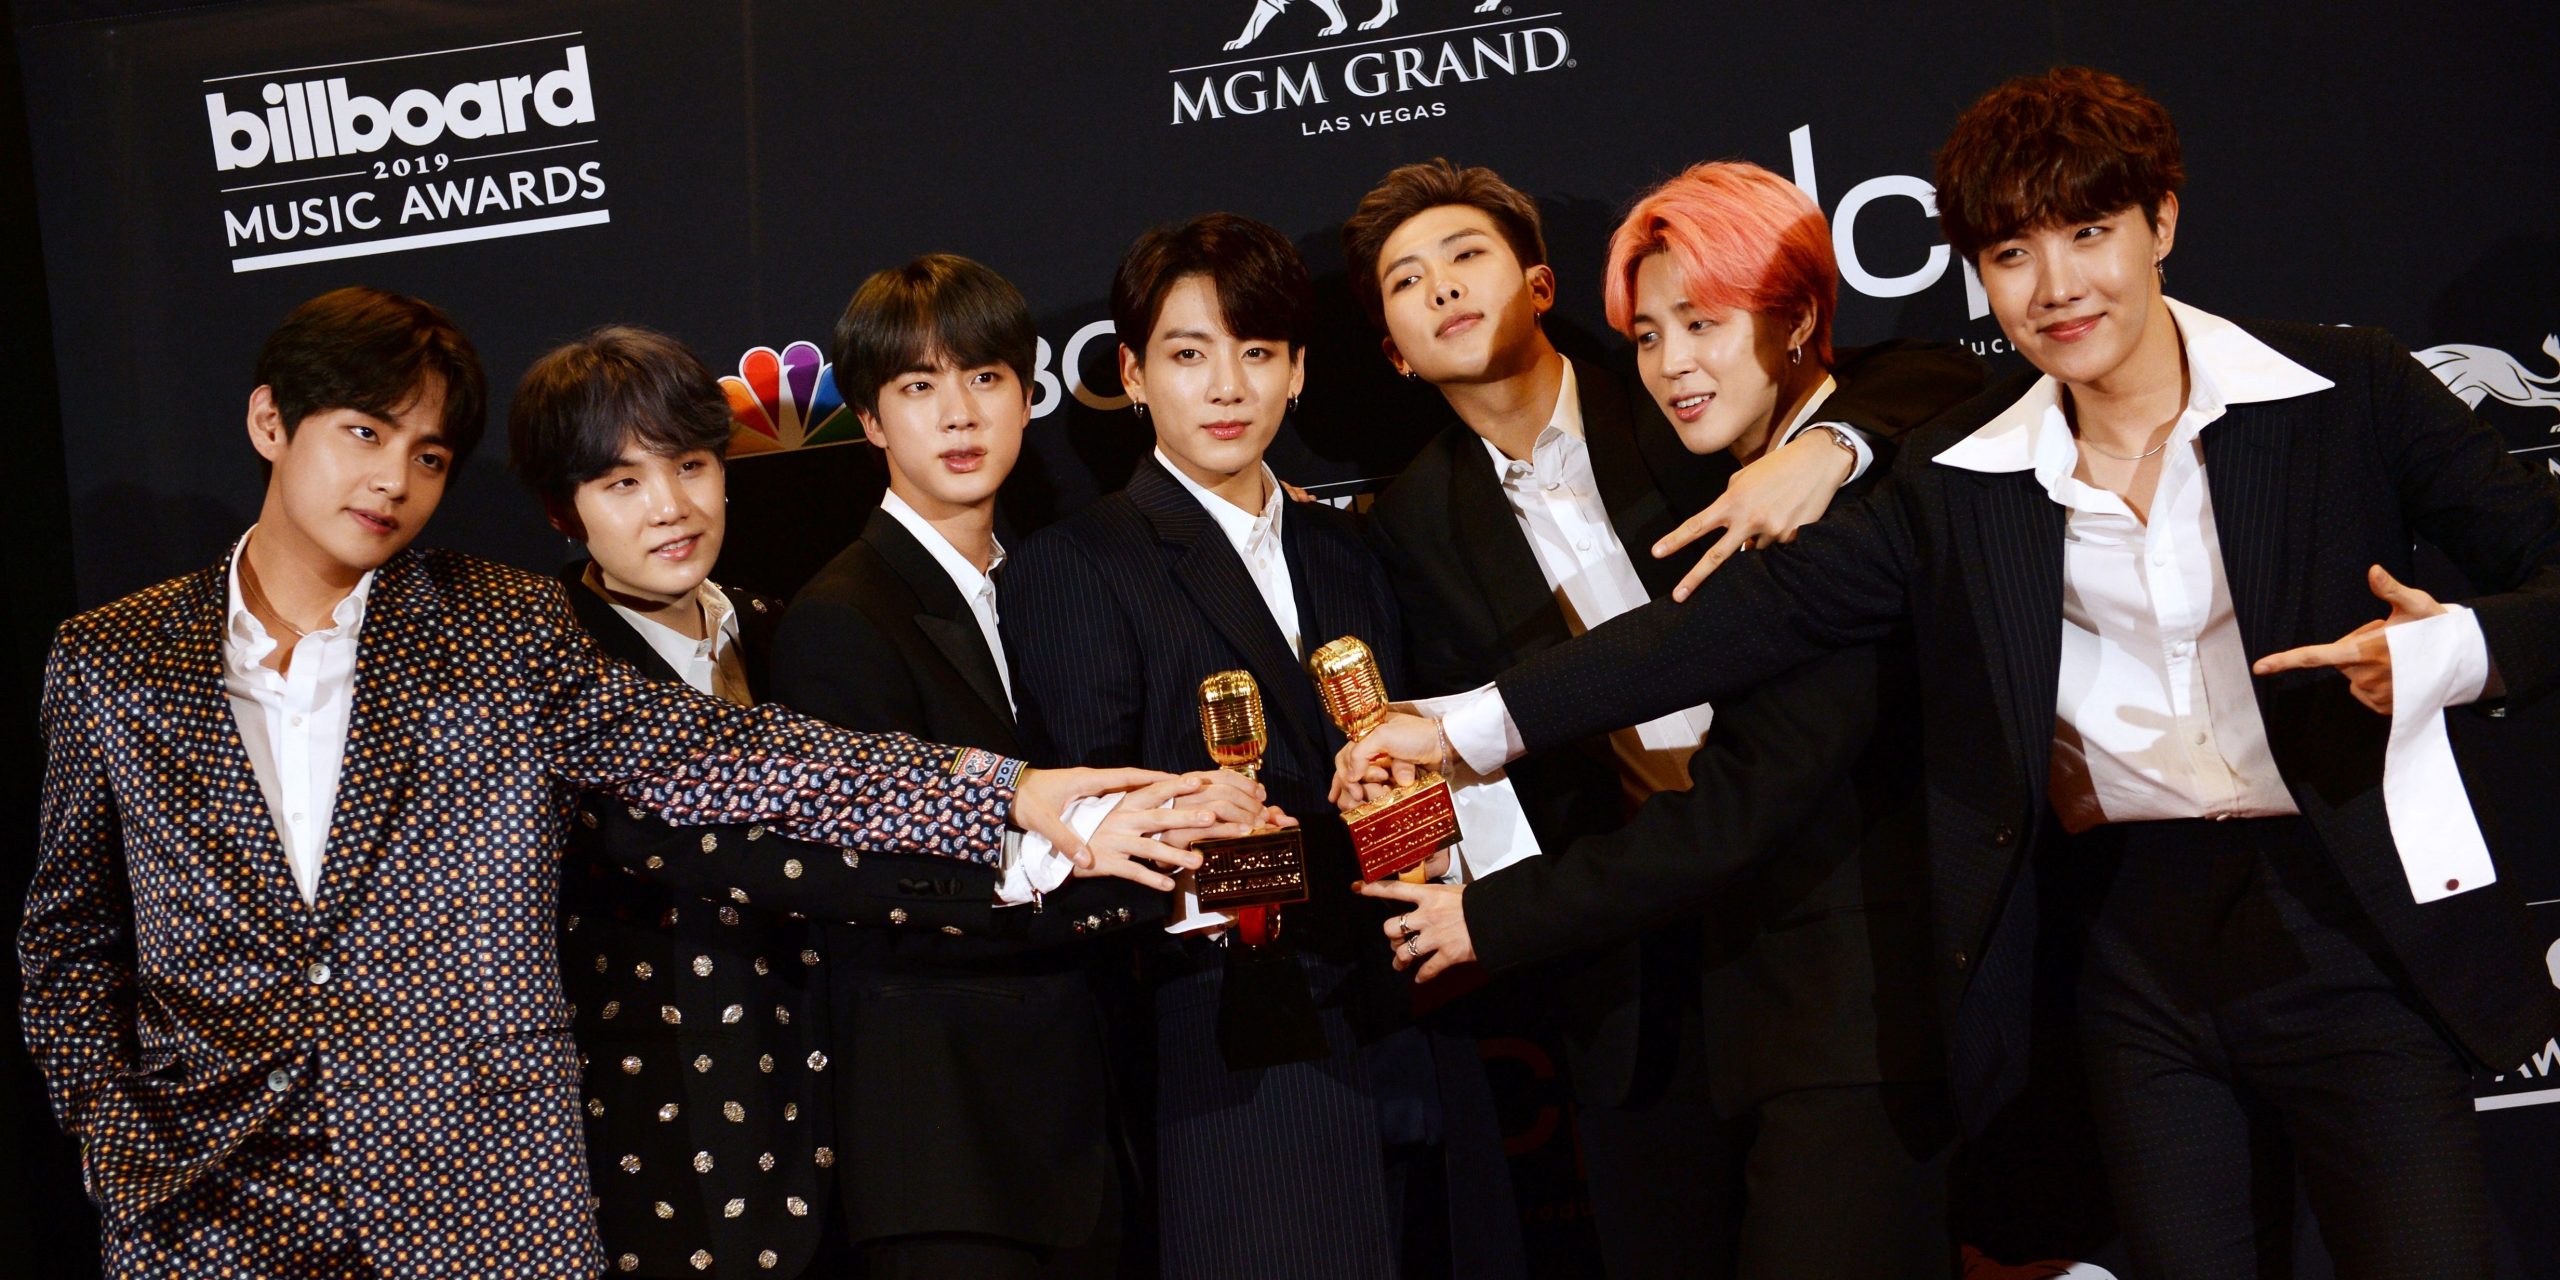 South Korean boy band BTS poses in the press room with their awards during the 2019 Billboard Music Awards at the MGM Grand Garden Arena on May 1, 2019, in Las Vegas, Nevada. (Photo by Bridget BENNETT / AFP)